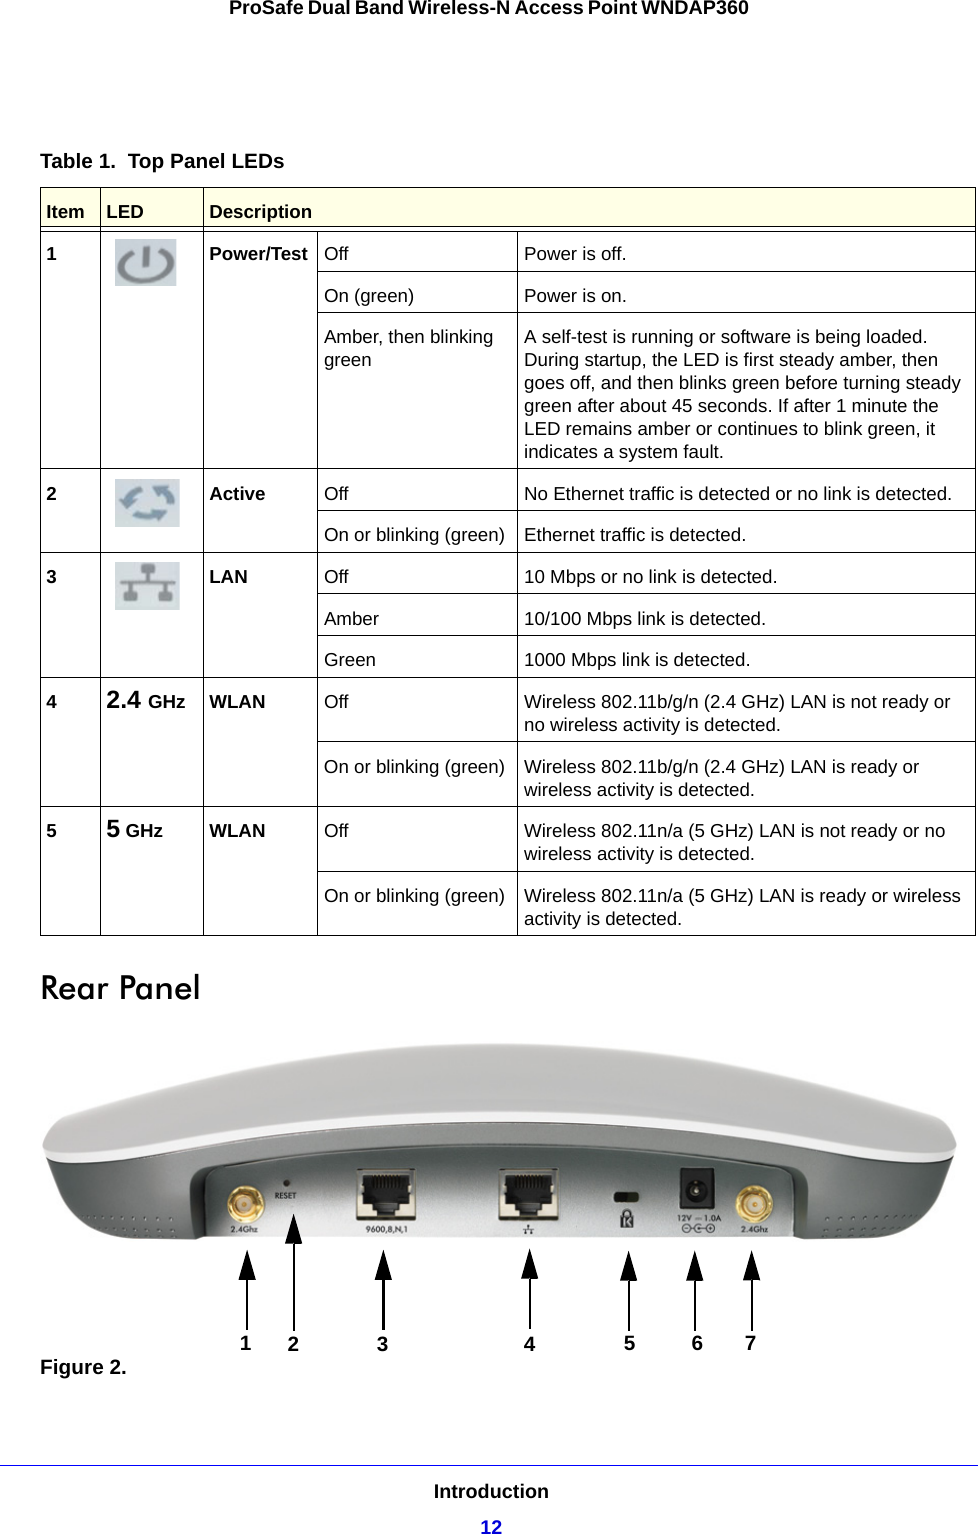 Introduction12ProSafe Dual Band Wireless-N Access Point WNDAP360 Rear PanelFigure 2. Table 1.  Top Panel LEDs Item LED Description1Power/Test Off  Power is off.On (green) Power is on.Amber, then blinking greenA self-test is running or software is being loaded. During startup, the LED is first steady amber, then goes off, and then blinks green before turning steady green after about 45 seconds. If after 1 minute the LED remains amber or continues to blink green, it indicates a system fault.2Active Off No Ethernet traffic is detected or no link is detected.On or blinking (green) Ethernet traffic is detected.3LAN Off 10 Mbps or no link is detected.Amber 10/100 Mbps link is detected.Green 1000 Mbps link is detected.42.4 GHz WLAN Off Wireless 802.11b/g/n (2.4 GHz) LAN is not ready or no wireless activity is detected.On or blinking (green) Wireless 802.11b/g/n (2.4 GHz) LAN is ready or wireless activity is detected.55 GHz WLAN Off Wireless 802.11n/a (5 GHz) LAN is not ready or no wireless activity is detected.On or blinking (green) Wireless 802.11n/a (5 GHz) LAN is ready or wireless activity is detected.123 4 567